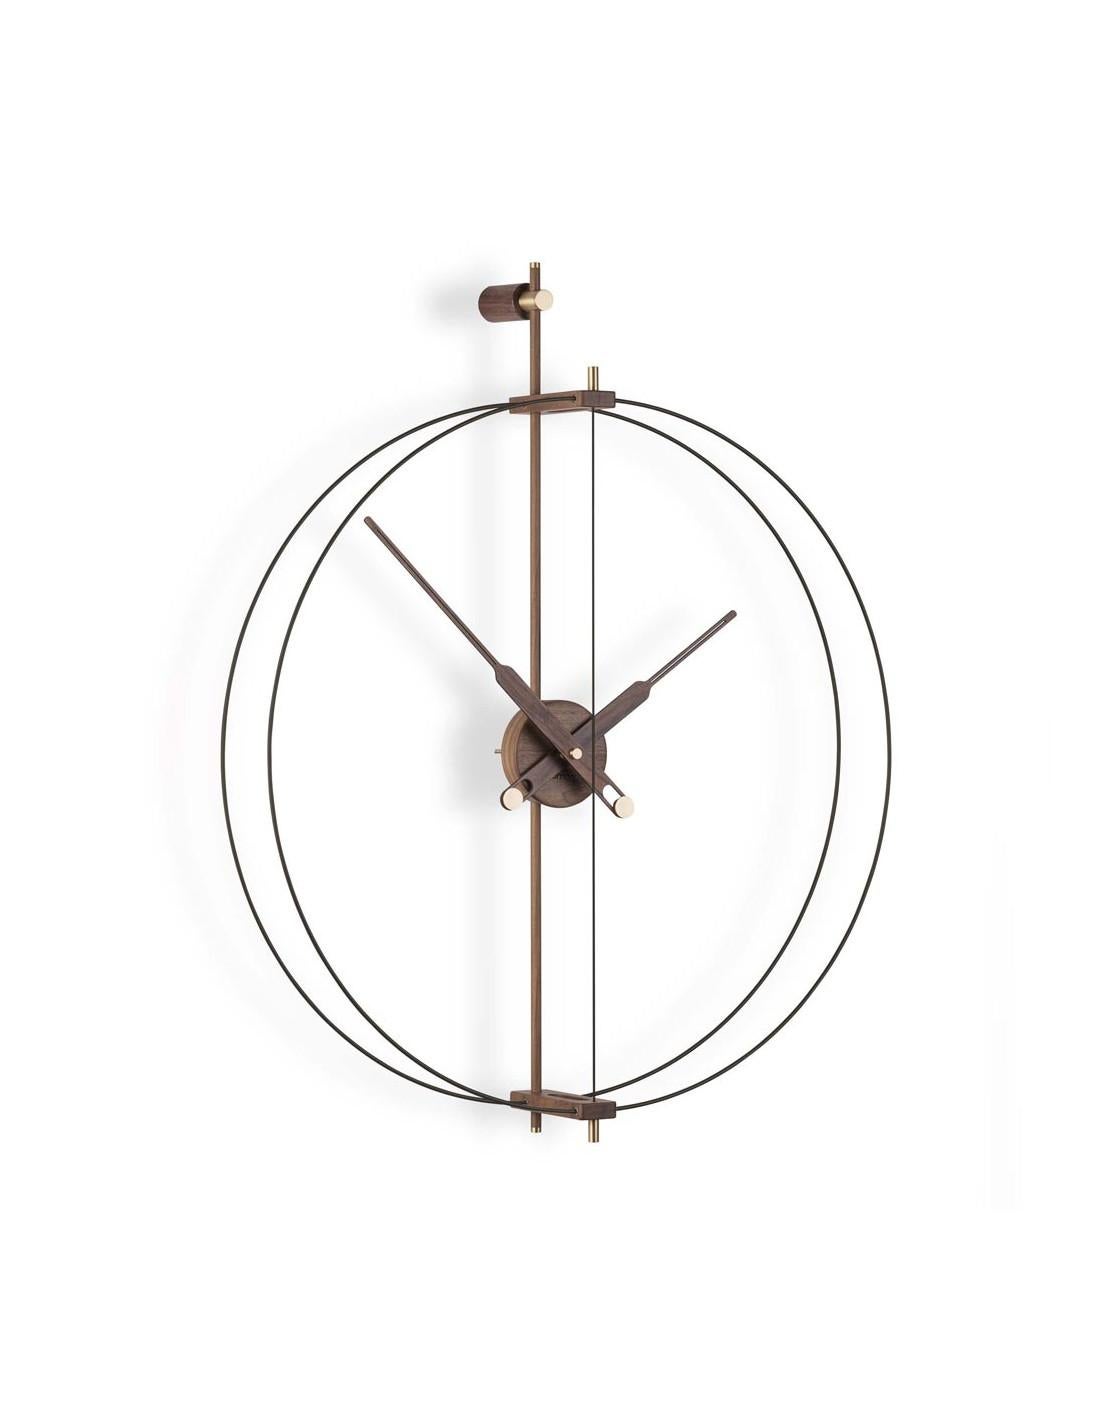 The modern Mini Barcelona Premium highlights the combination of golden pieces with natural walnut, which give it a more sophisticated and elegant aesthetic and quality.
Mini Barcelona Premium wall clock : Black fiberglass or brass-finished